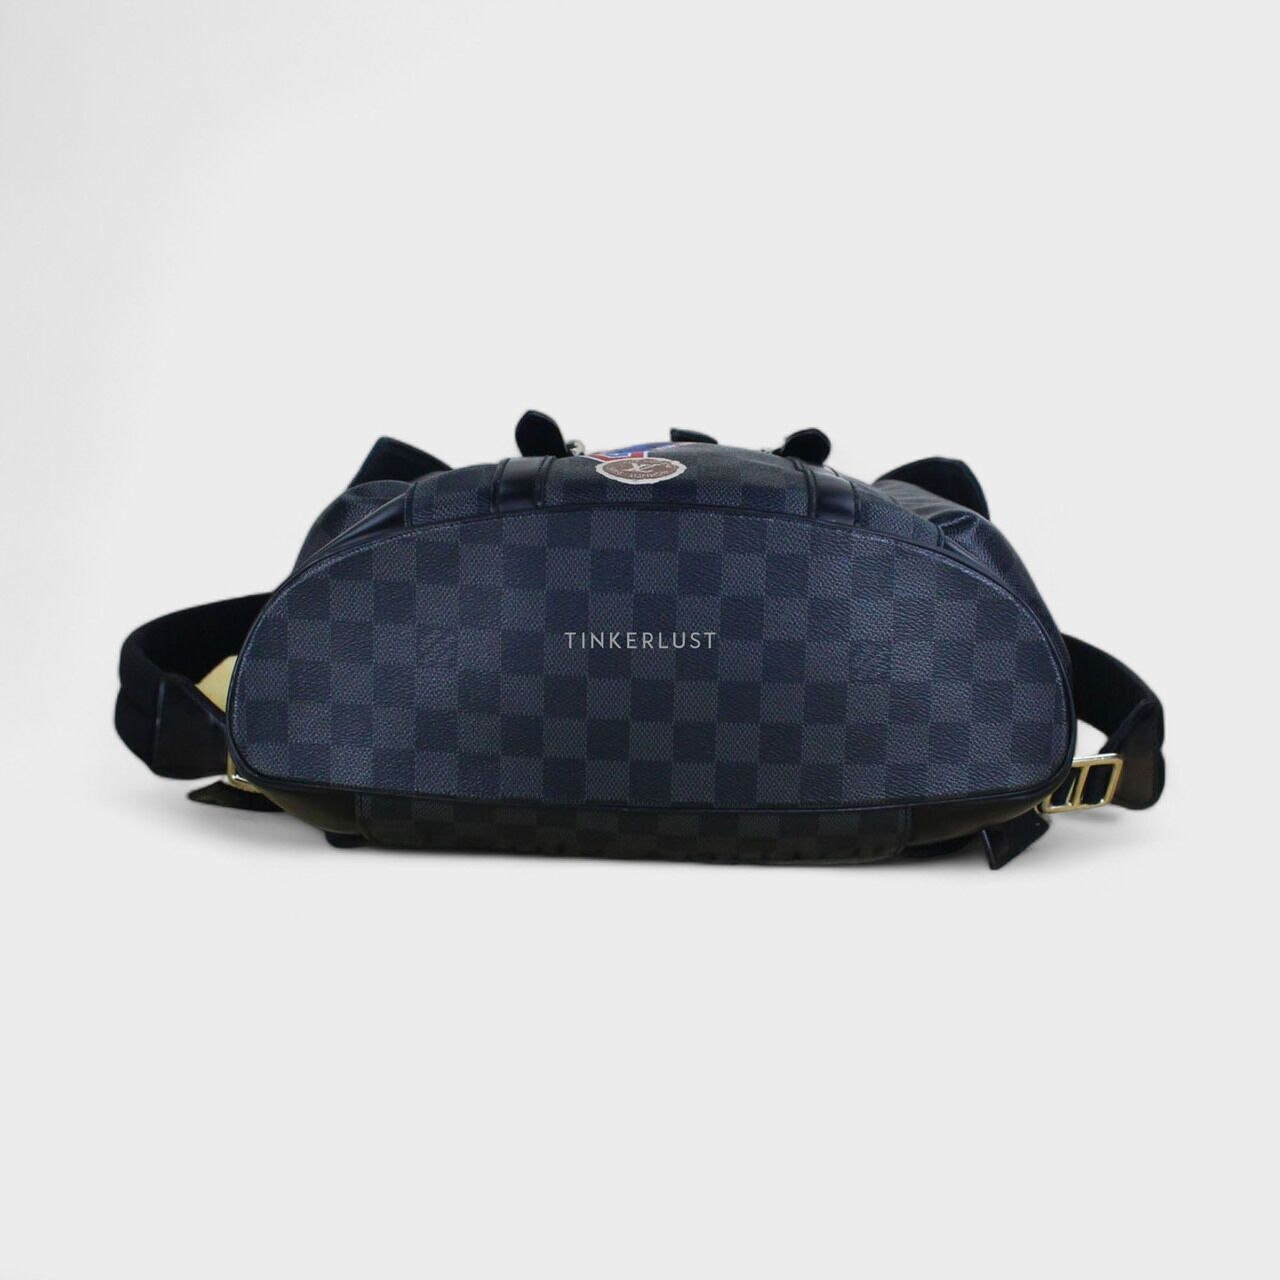 Louis Vuitton Christoper Damier Limited Edition Backpack 